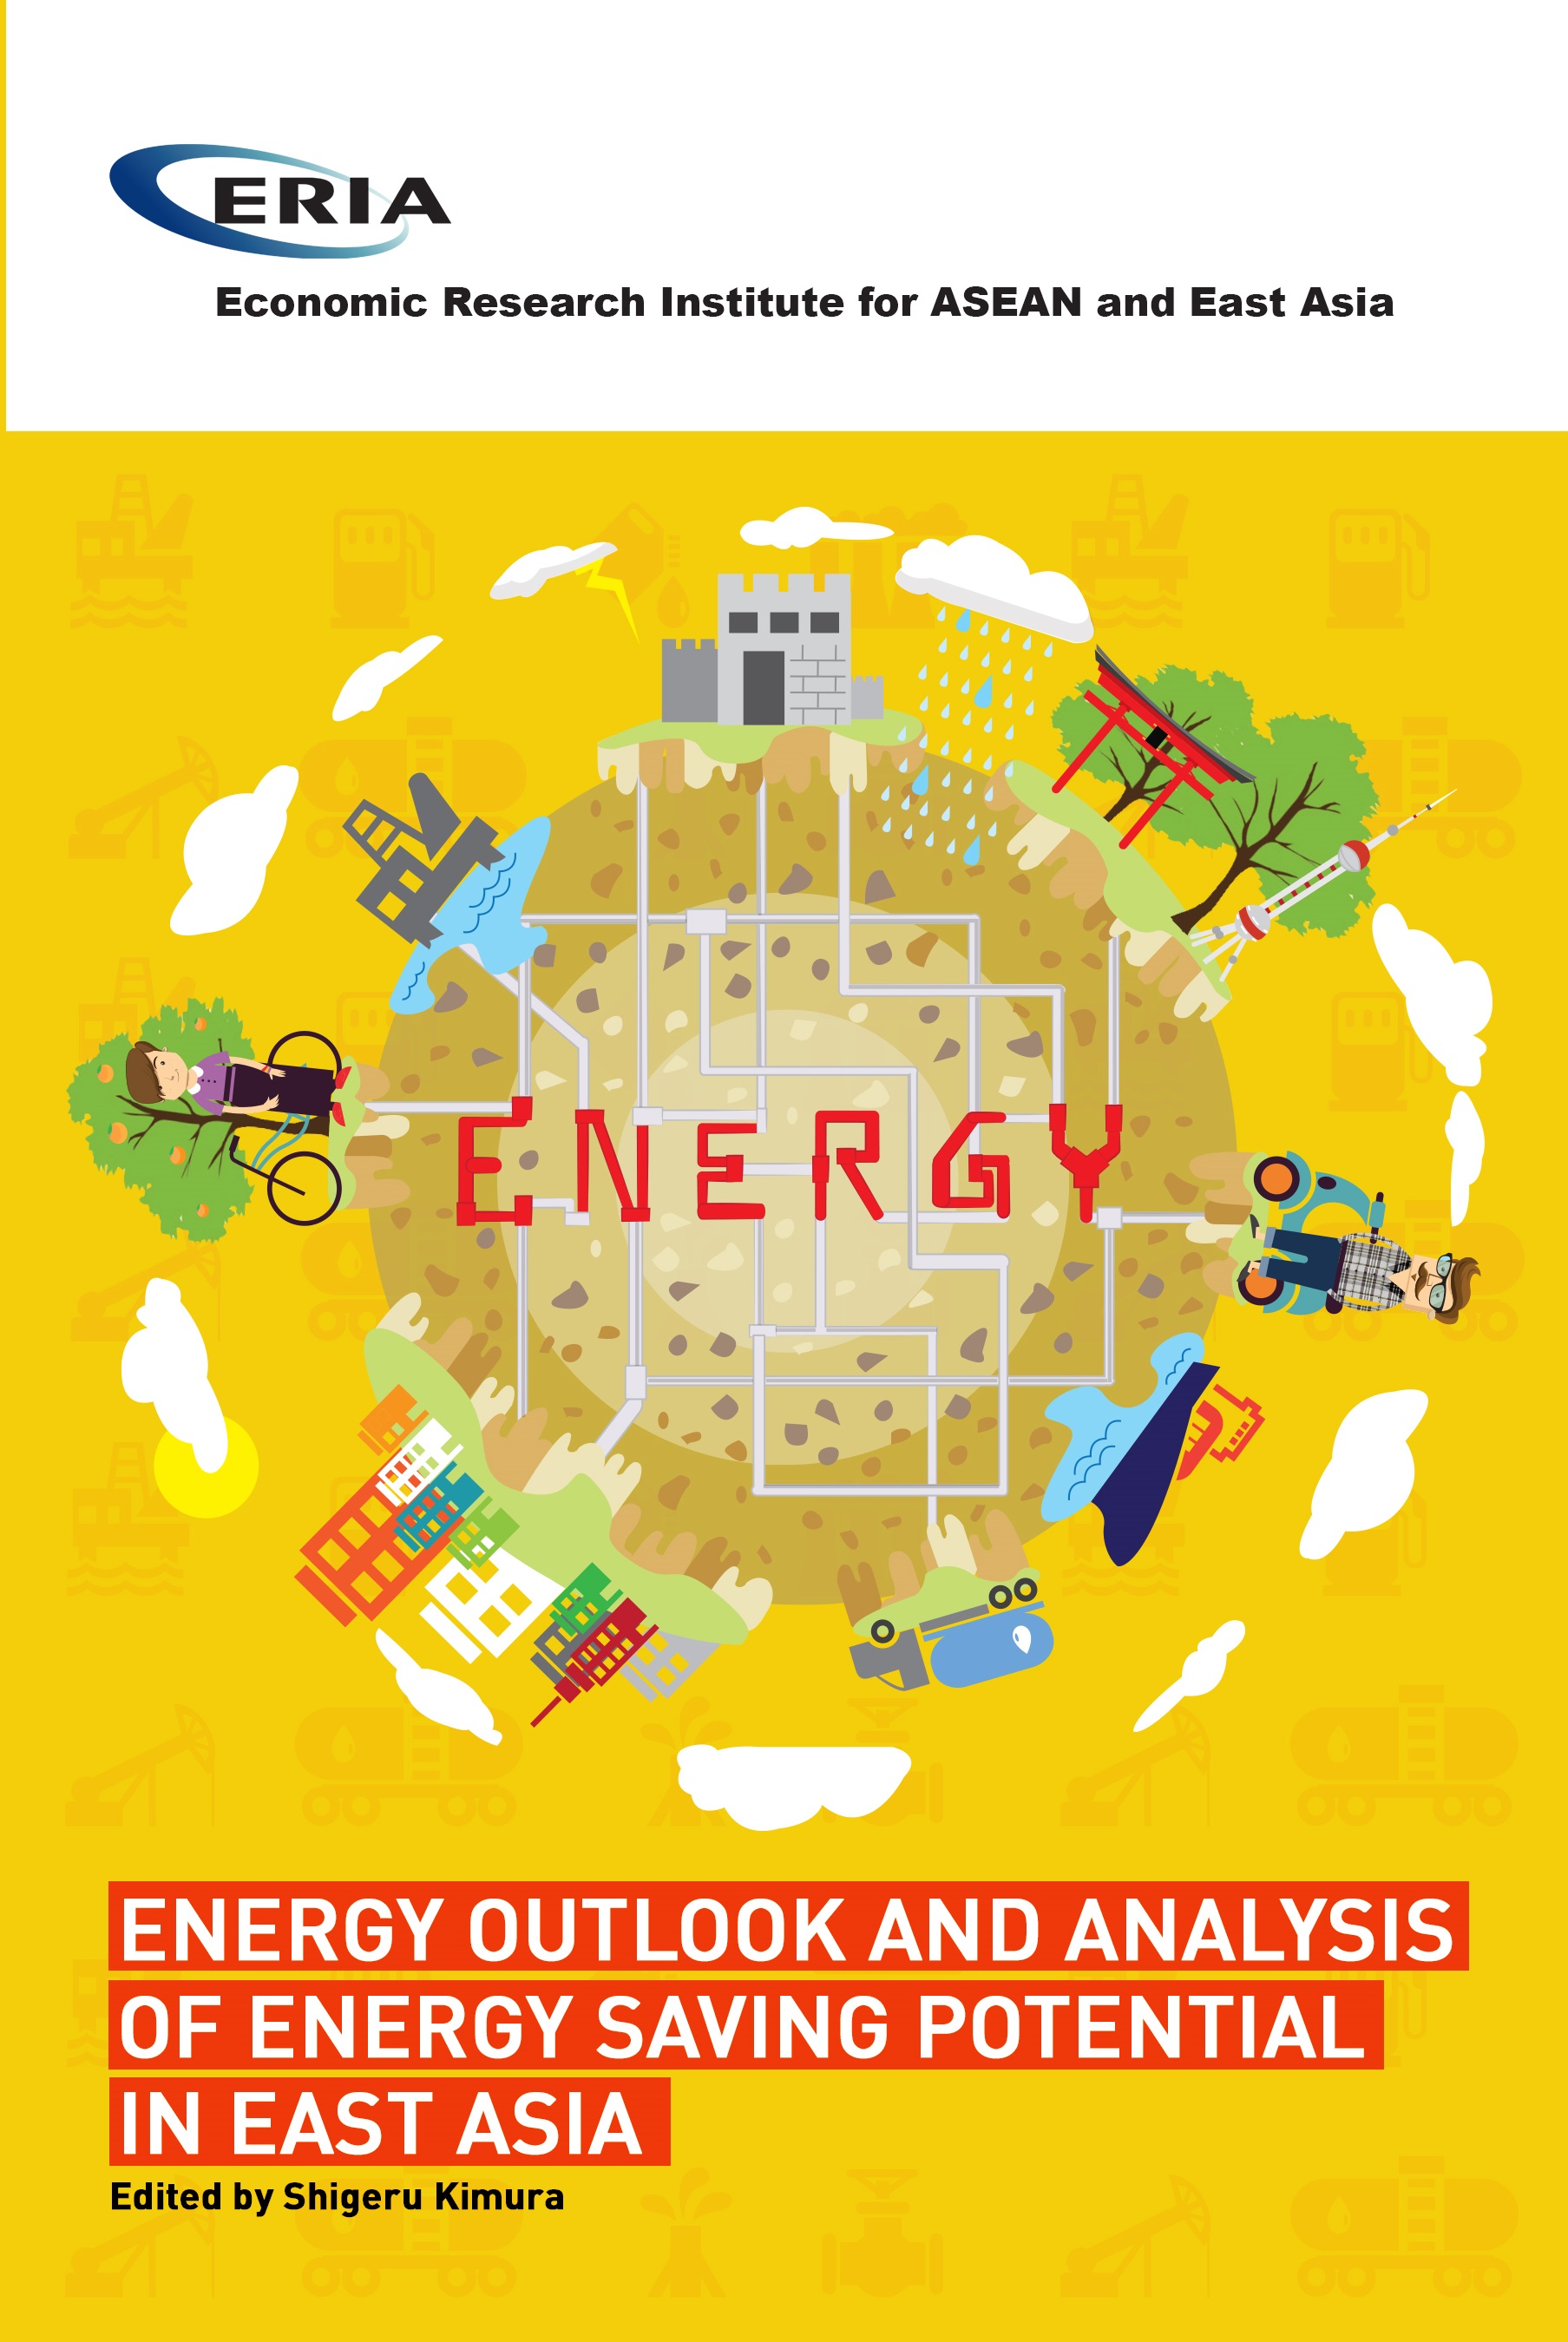 Energy Outlook and Analysis of Energy Saving Potential in East Asia